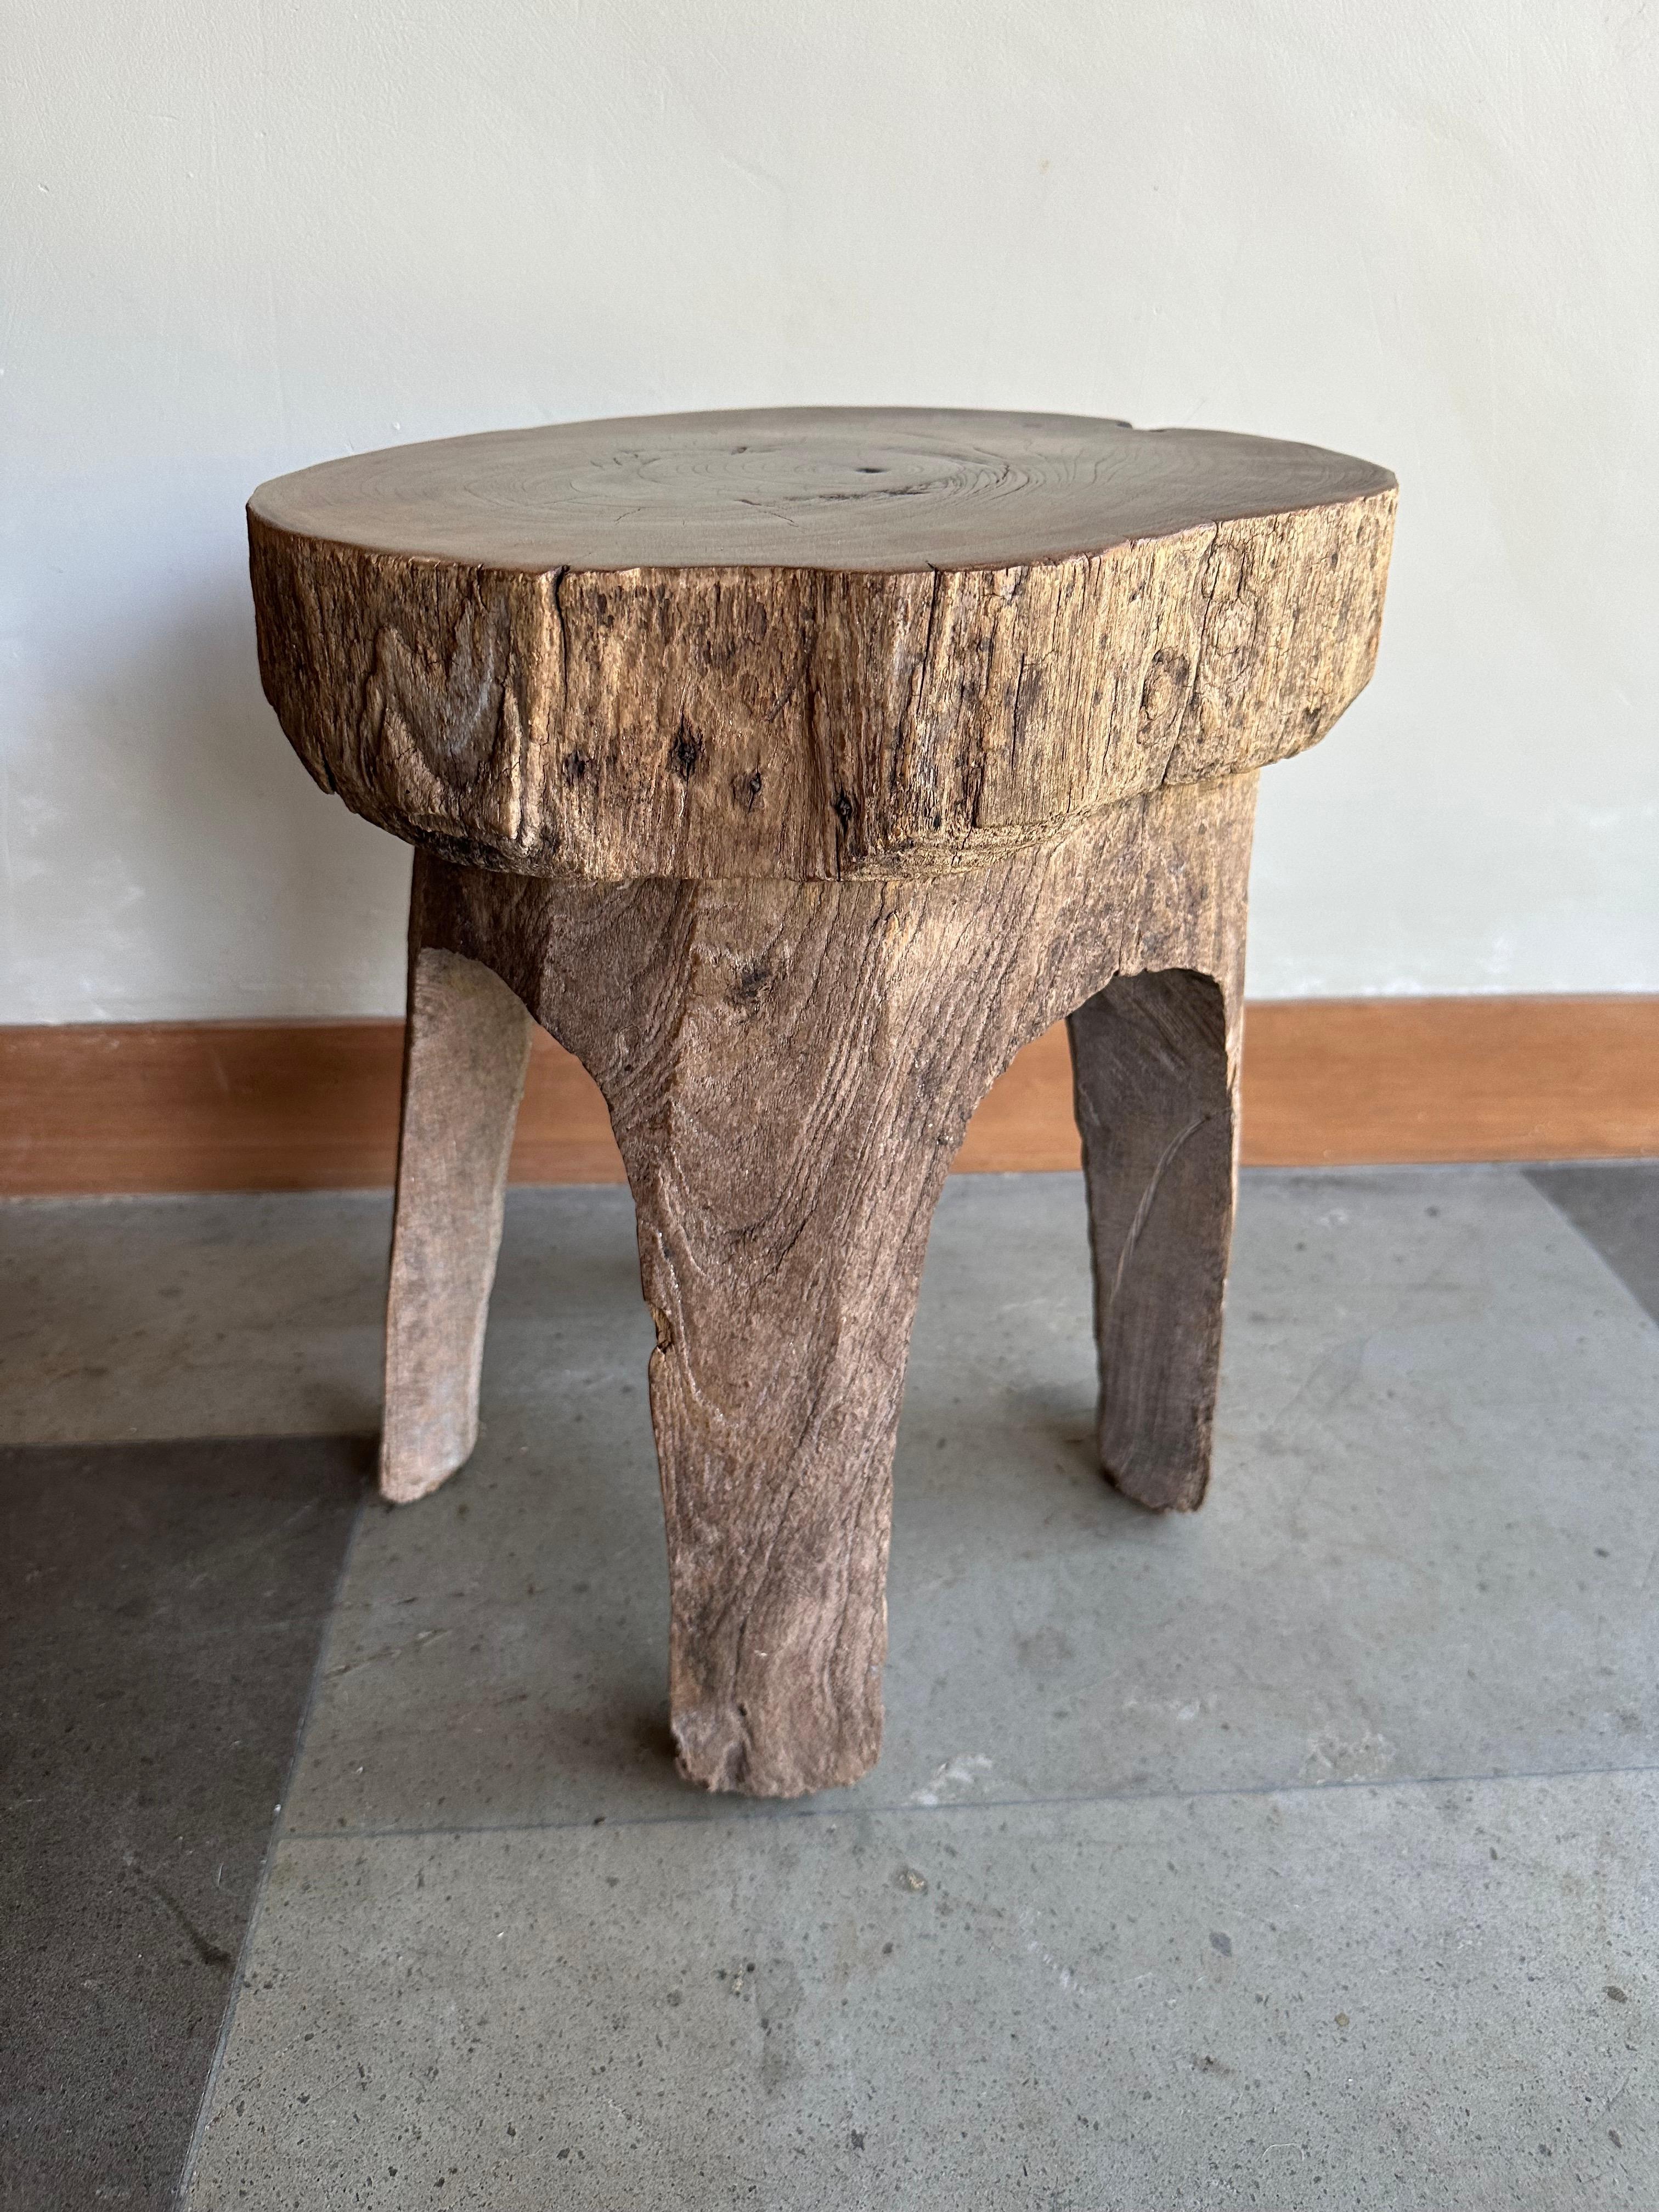 A wonderfully vibrant antique teak stool from Java, Indonesia. This stool was carved from a single block of wood and features a wonderful mix of wood textures and shades. The age-related patina adds to its charm. The perfect object to bring warmth